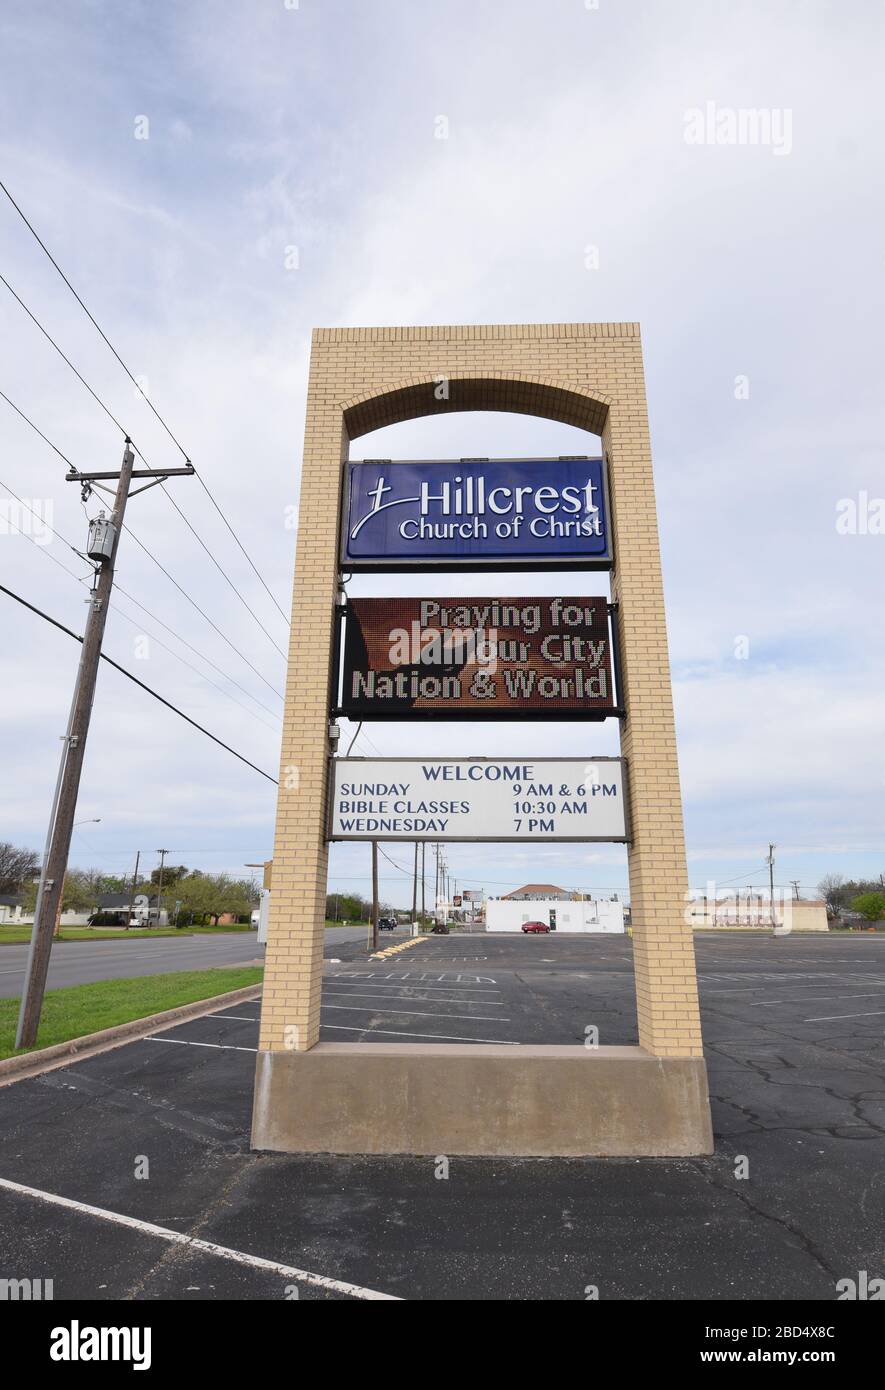 Churches in Abilene, TX are closed in response to a call for social distancing by Texas Governor Abbott, President Trump and the CDC. Hillcrest Church of Christ announces on their electronic sign a call for prayer and an annoucement for their online services. Stock Photo